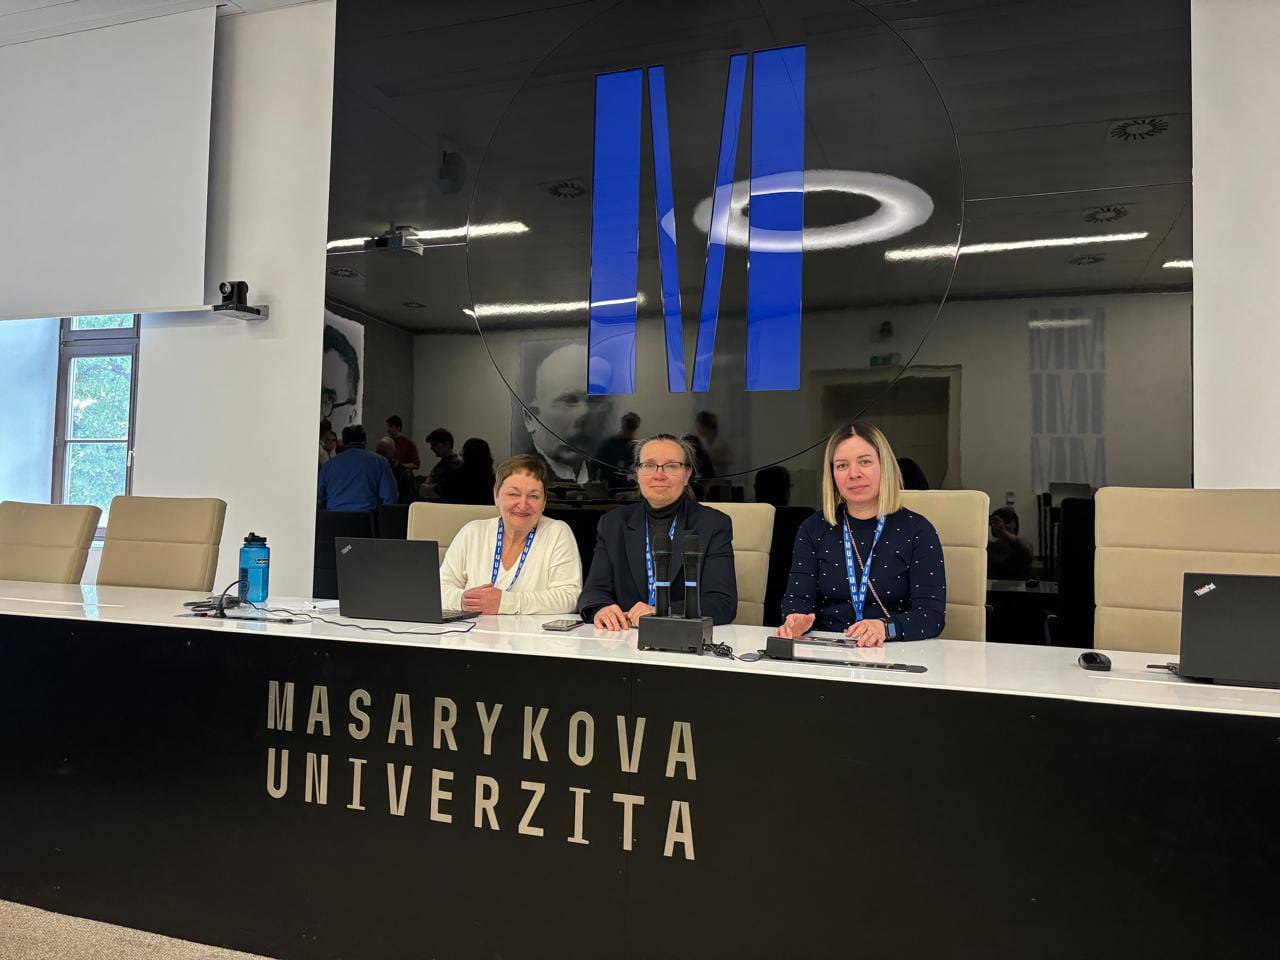 The first DigiUni training at Masaryk University in Brno